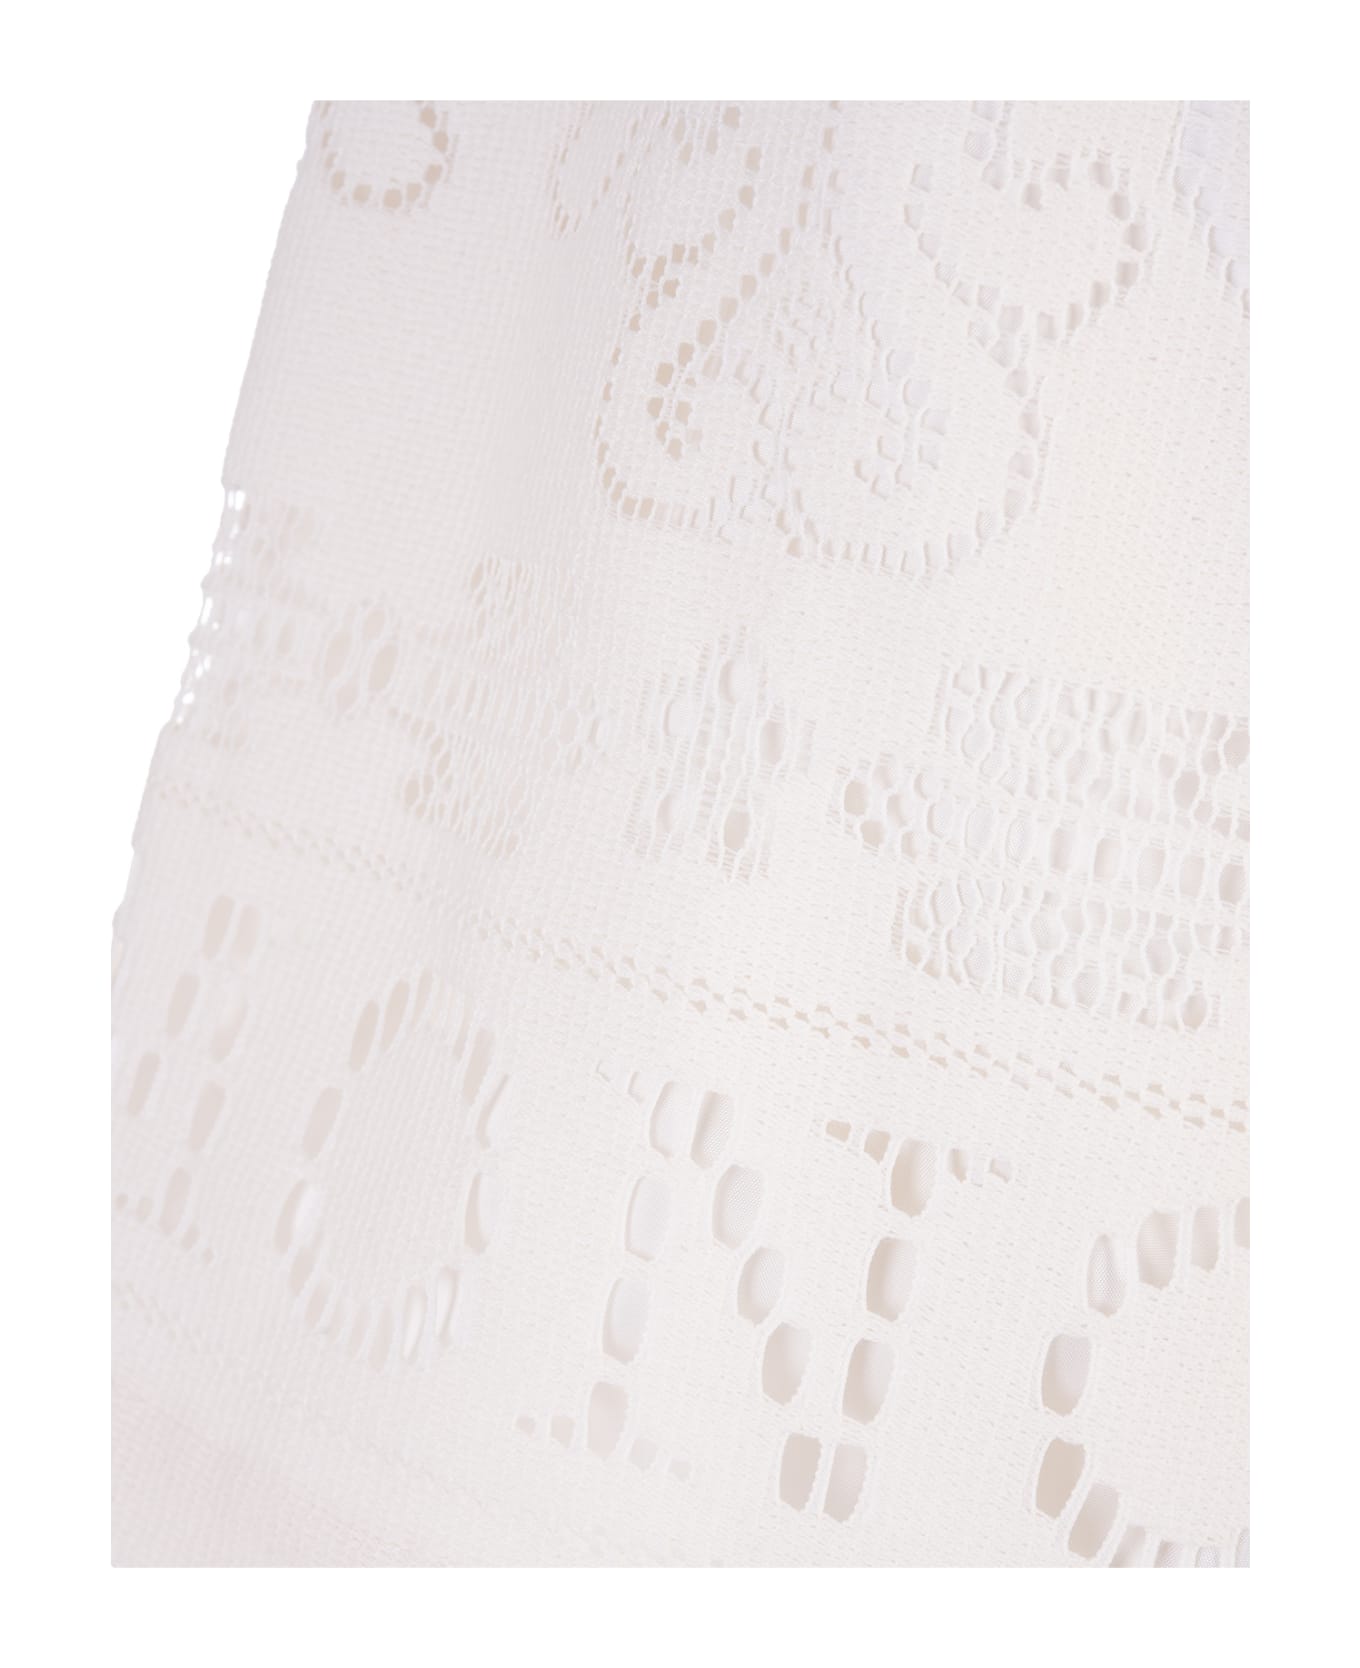 Moncler Cream Shorts With Cut-out Embroidery - Bianco